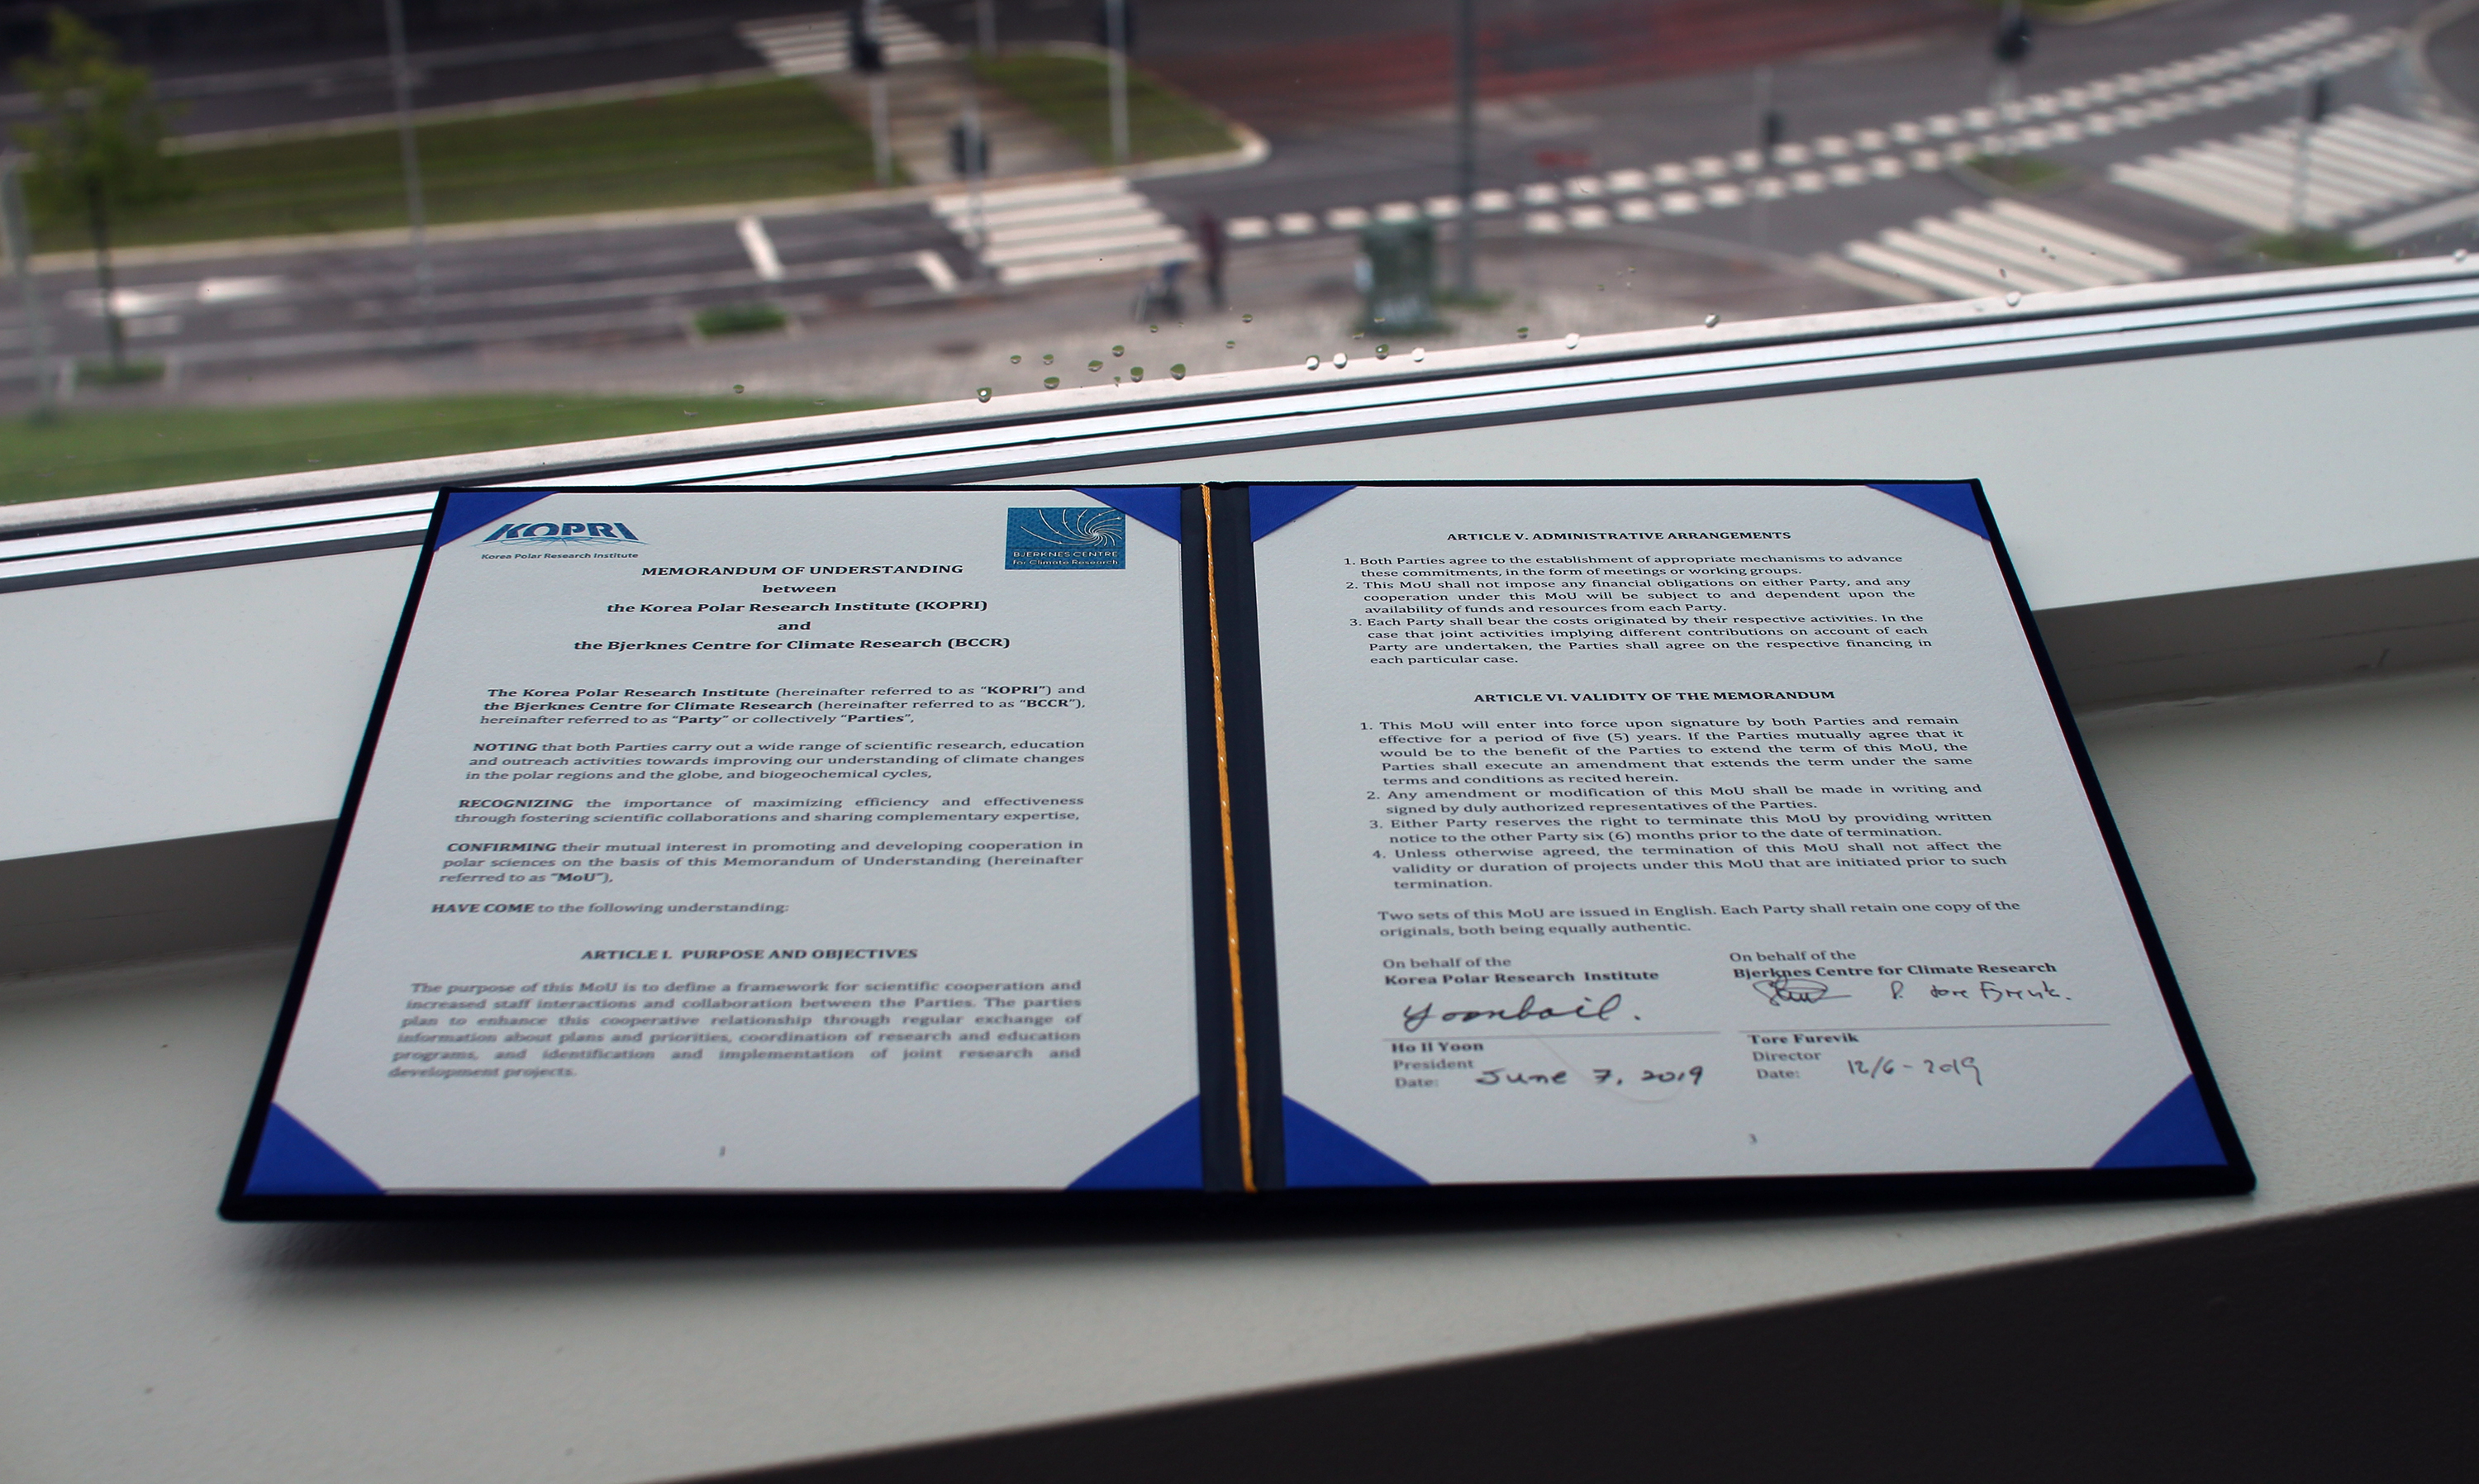 The MoU between KOPRI and the Bjerknes Centre